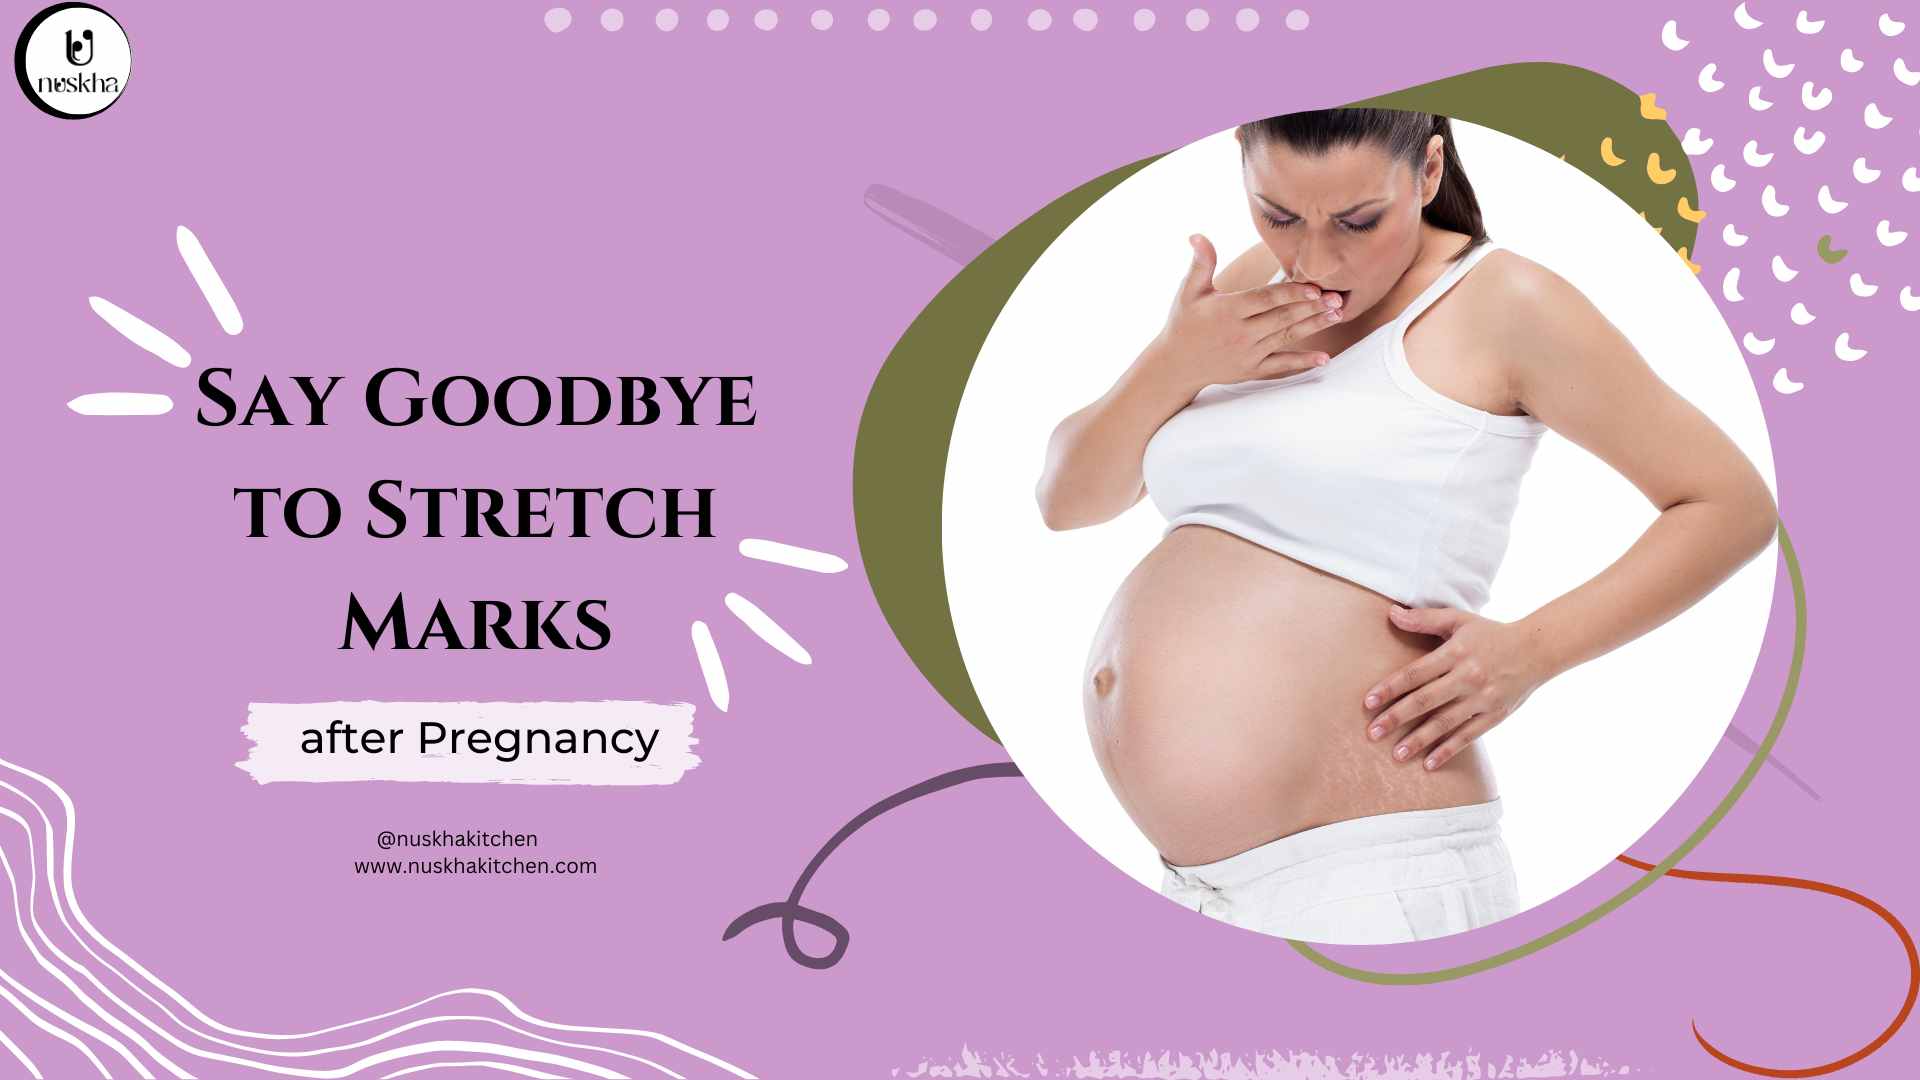 Say Goodbye to Stretch Marks after Pregnancy